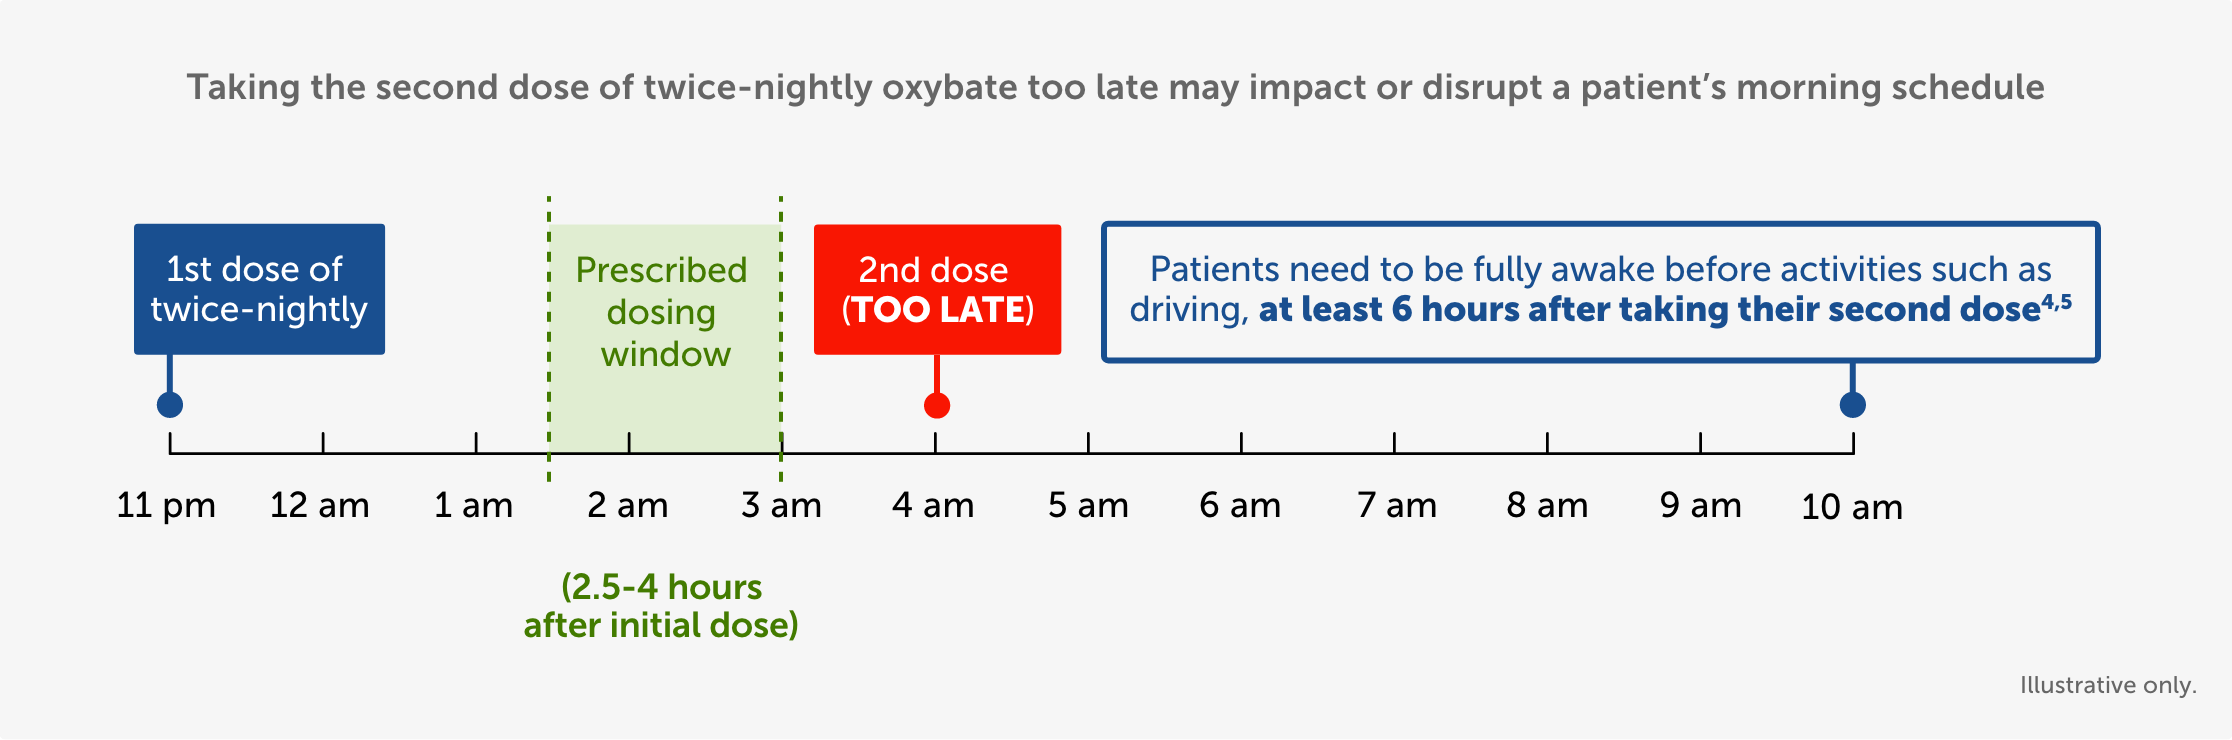 Timeline depicting that when patients take their second oxybate dose too late, they run the risk of not being fully awake at least 6 hours before activities such as driving